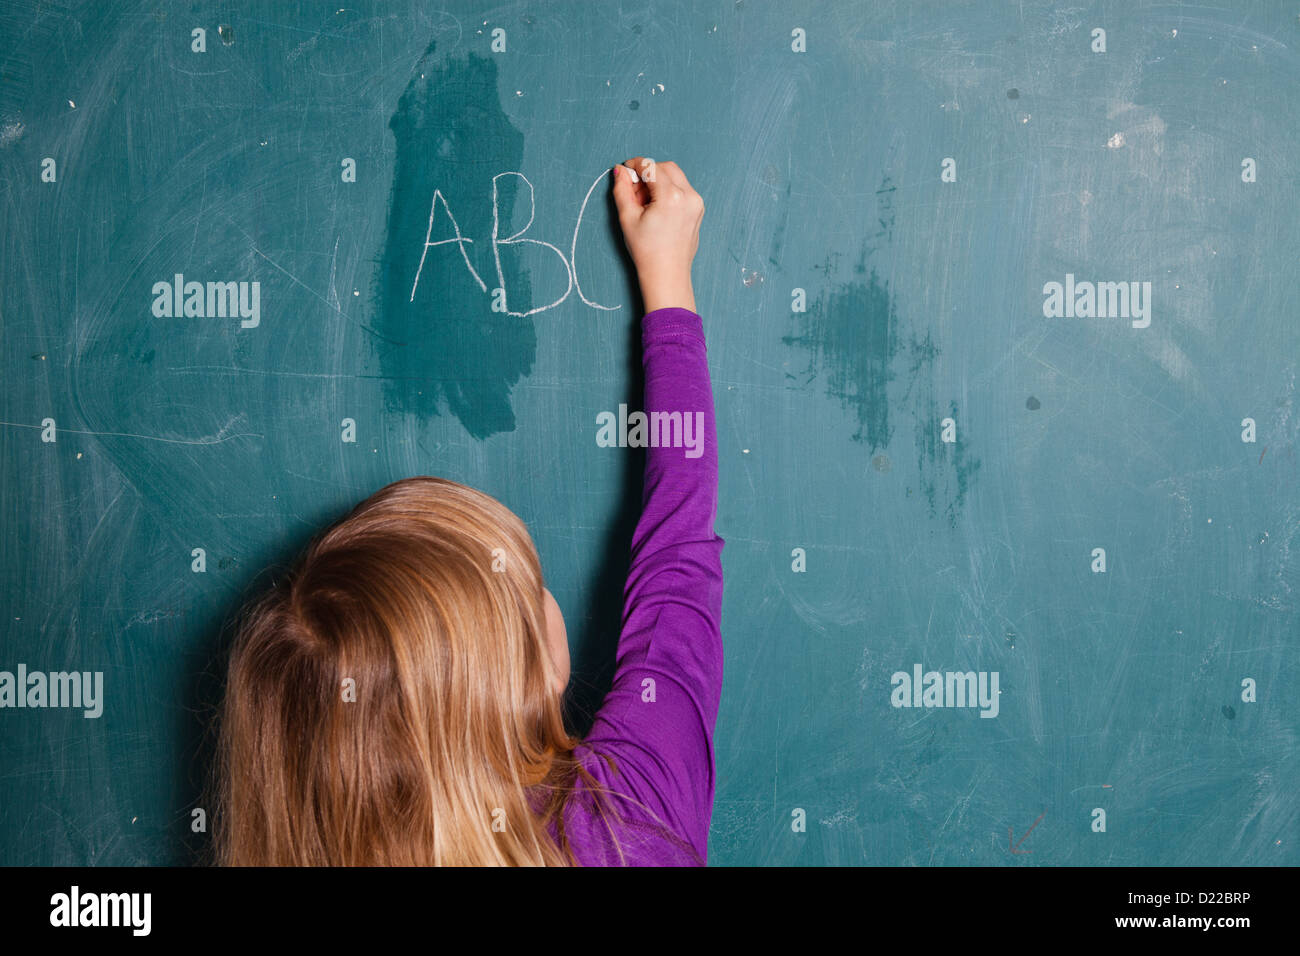 Young girl writing letters of the alphabet on chalkboard with chalk Stock Photo